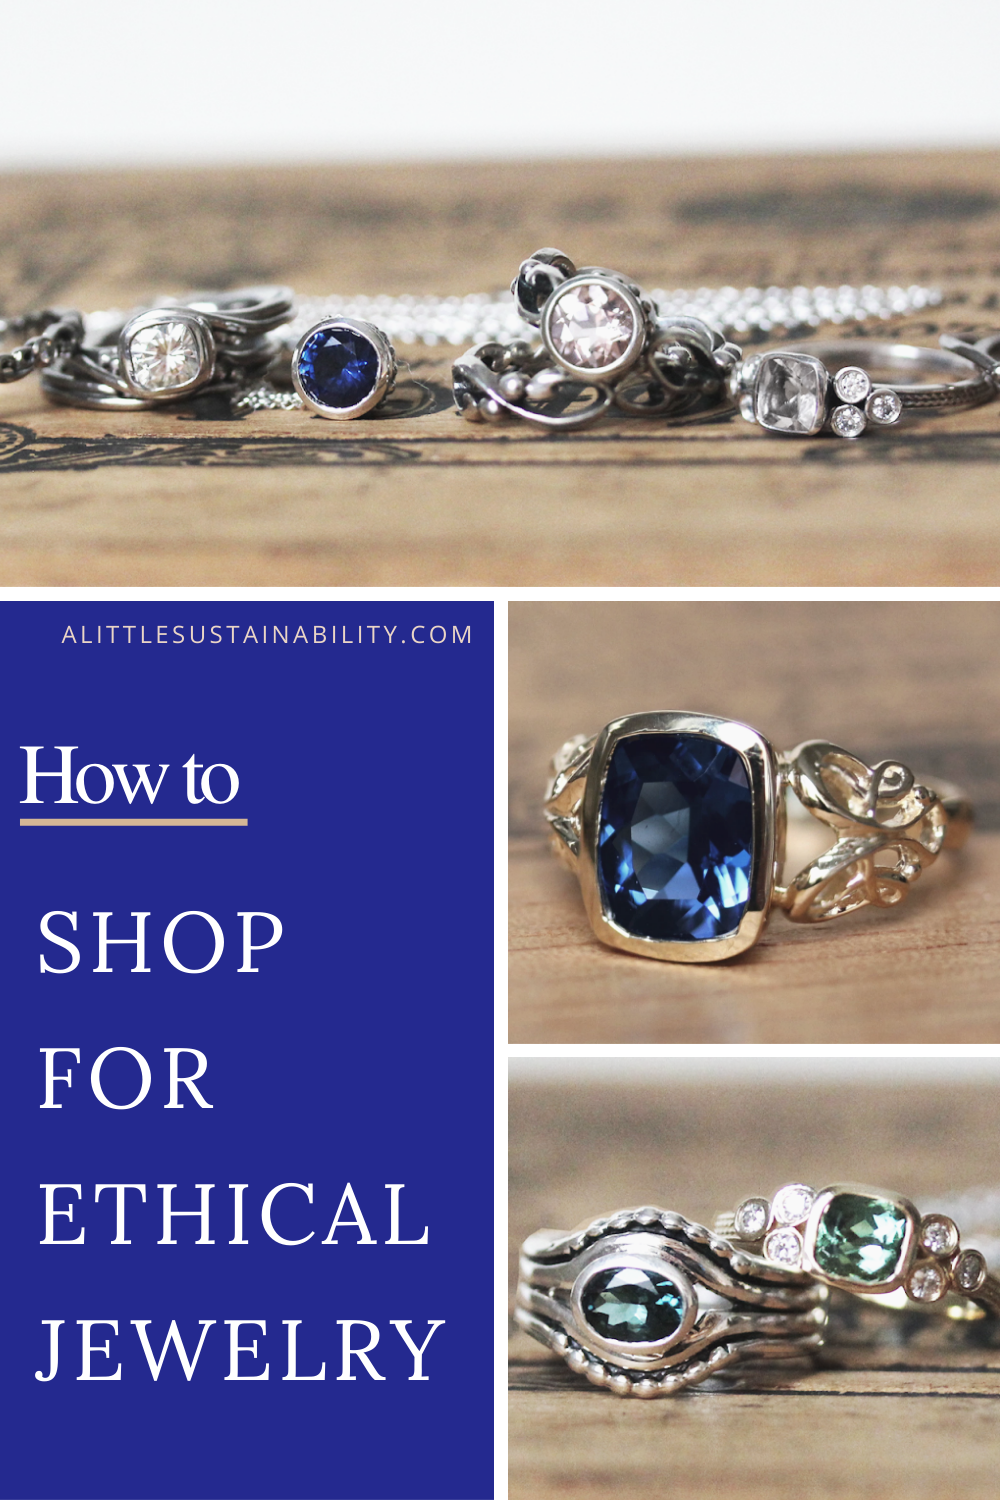 What is eco-friendly jewelry and how do you shop for it? Learn all about it and which brand we love offering recycled, ethical jewelry. Visit www.alittlesustainability.com for more.